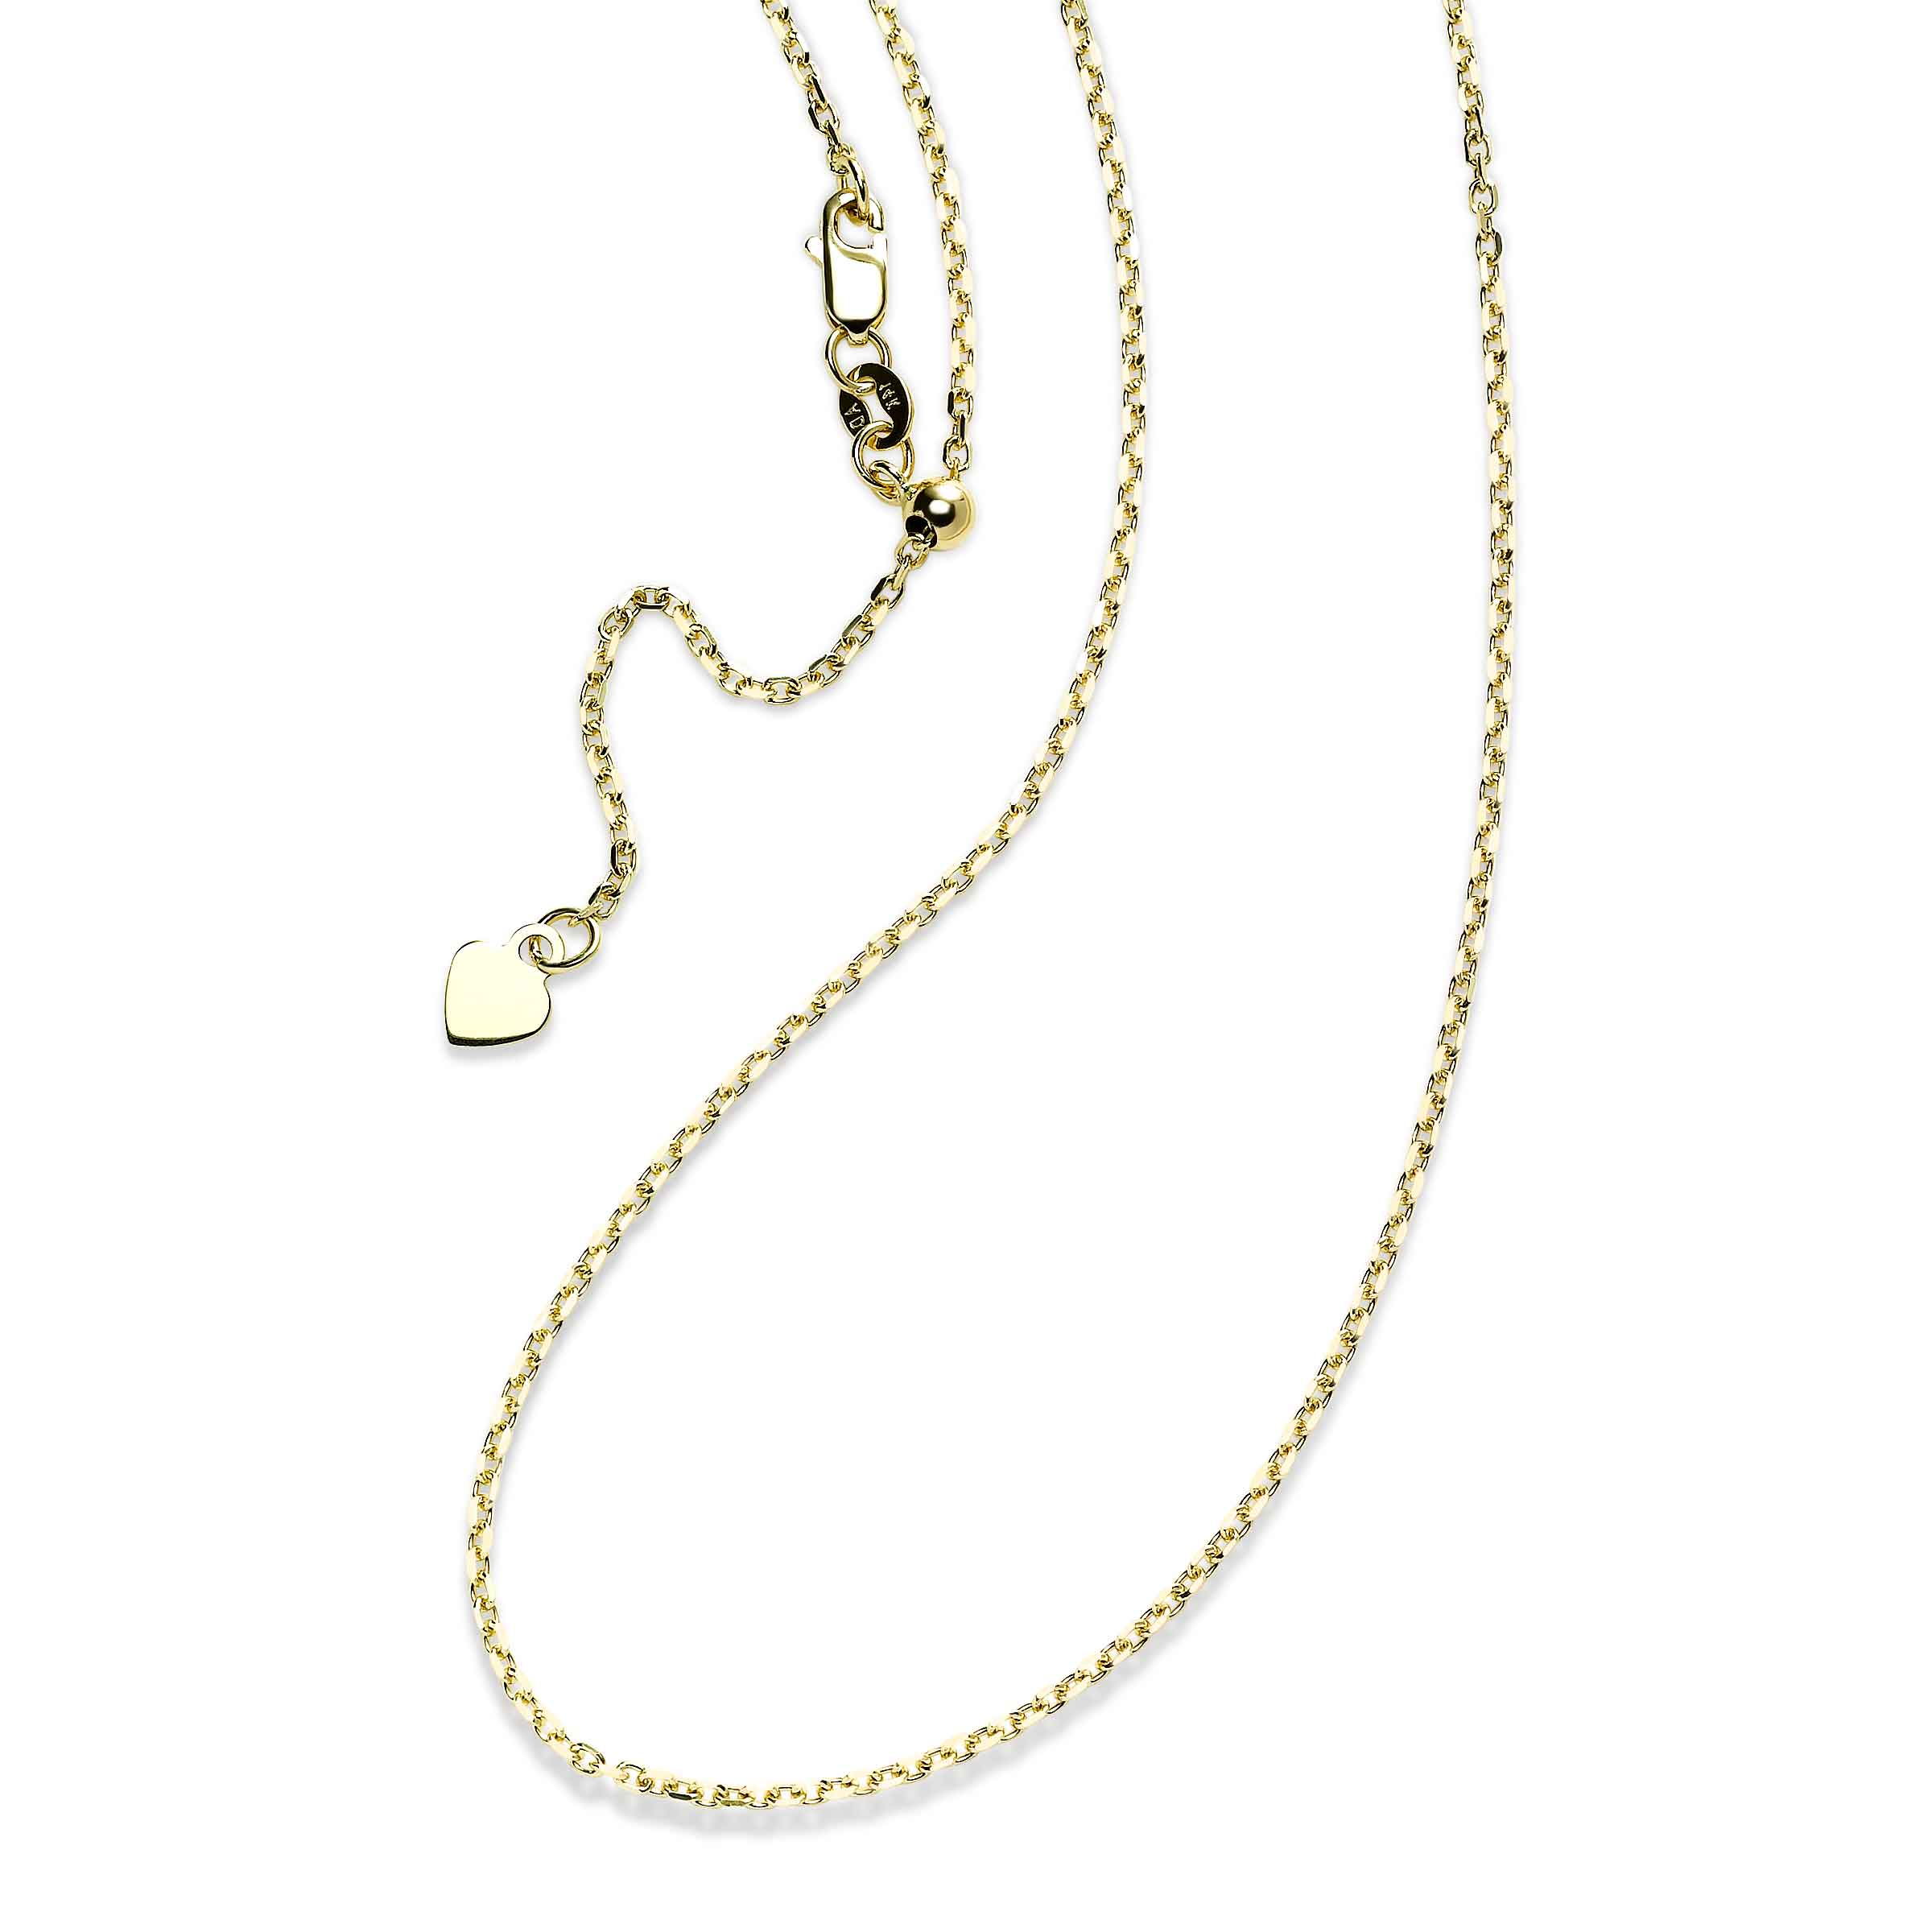 Luvbo Jewels Gallery Vintage Knot Gold Vermeil Adjustable Chain Necklace